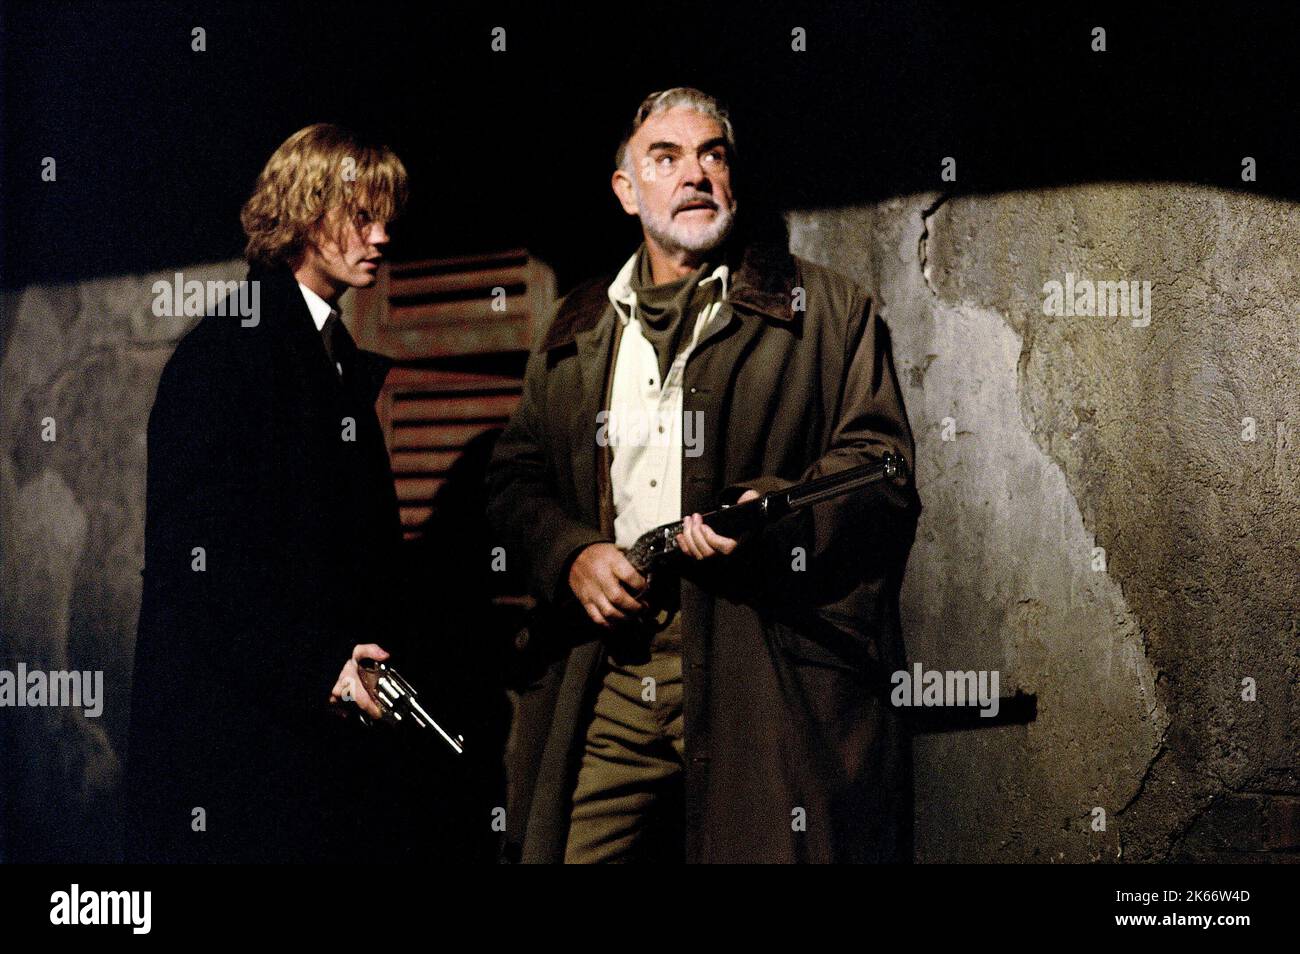 WEST,CONNERY, THE LEAGUE OF EXTRAORDINARY GENTLEMEN, 2003 Stock Photo